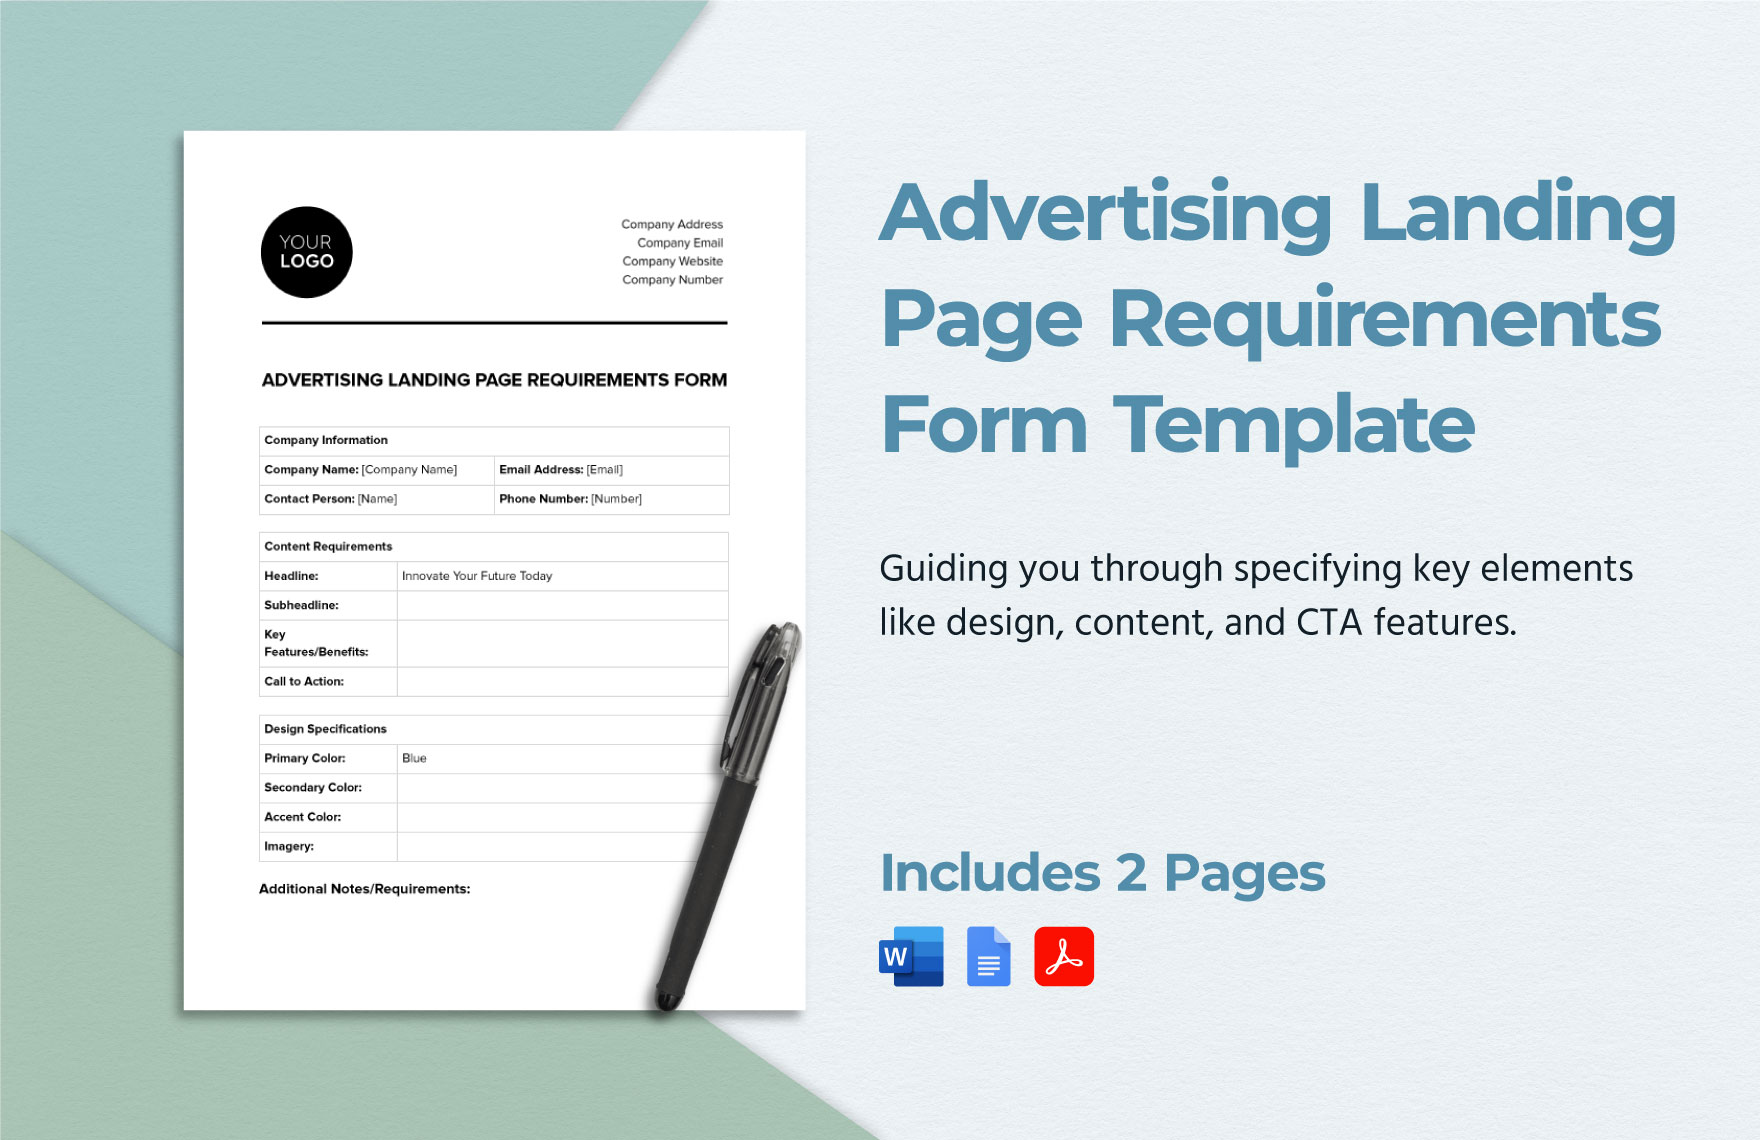 Advertising Landing Page Requirements Form Template in Word, Google Docs, PDF